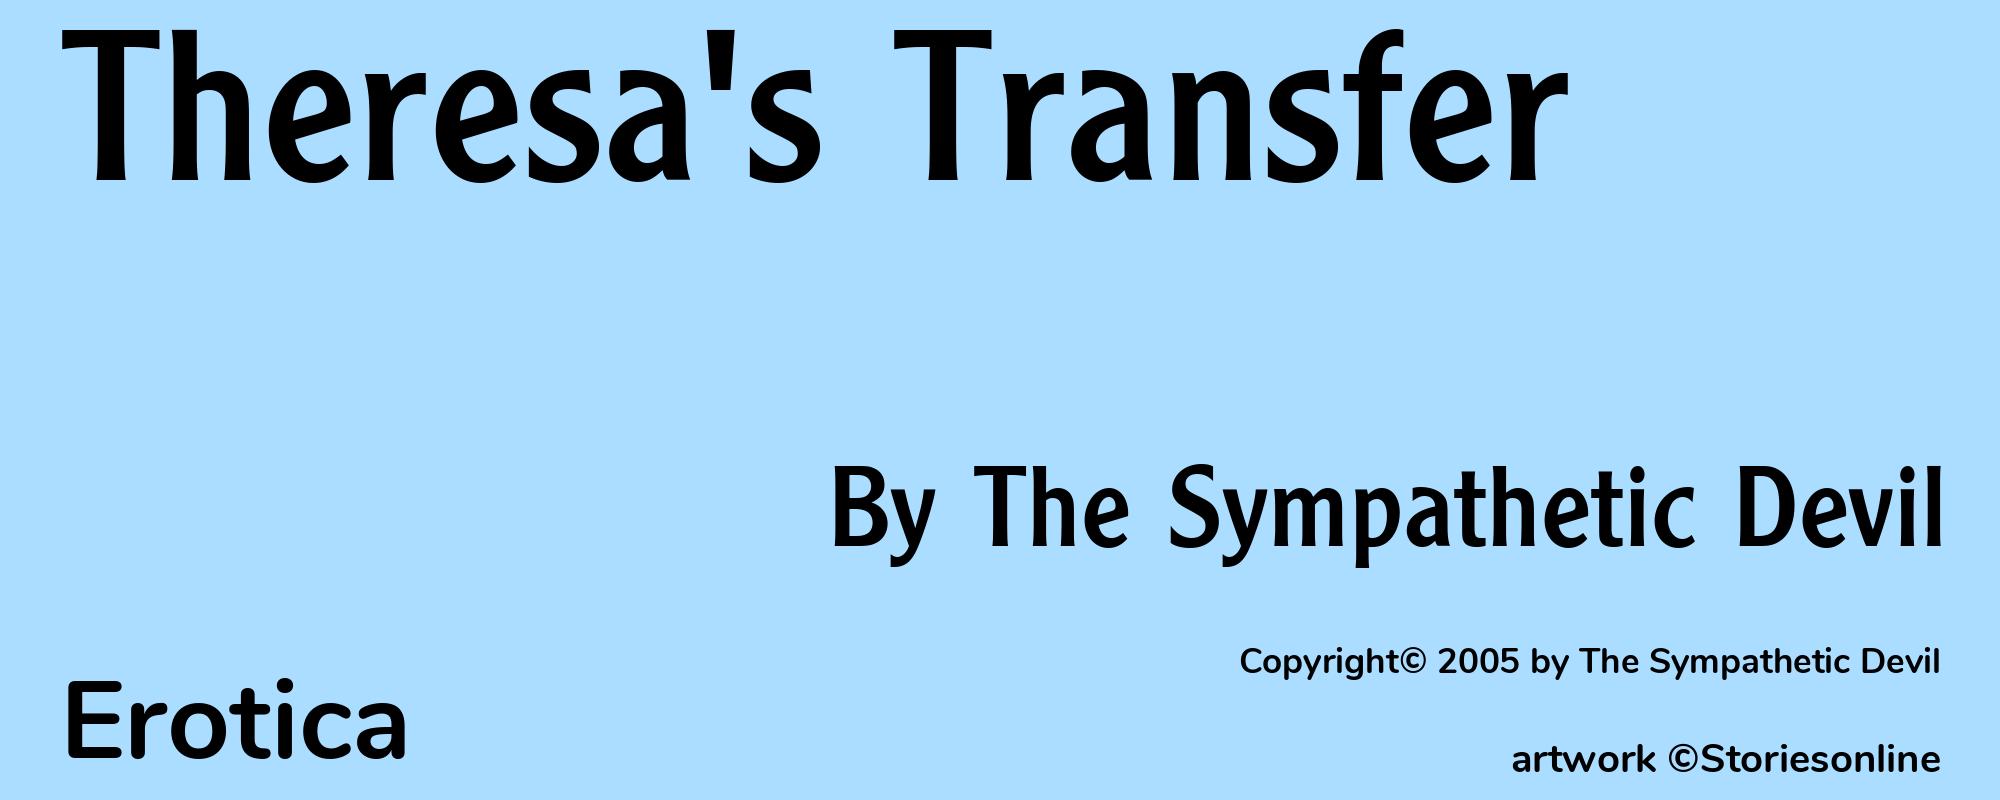 Theresa's Transfer - Cover